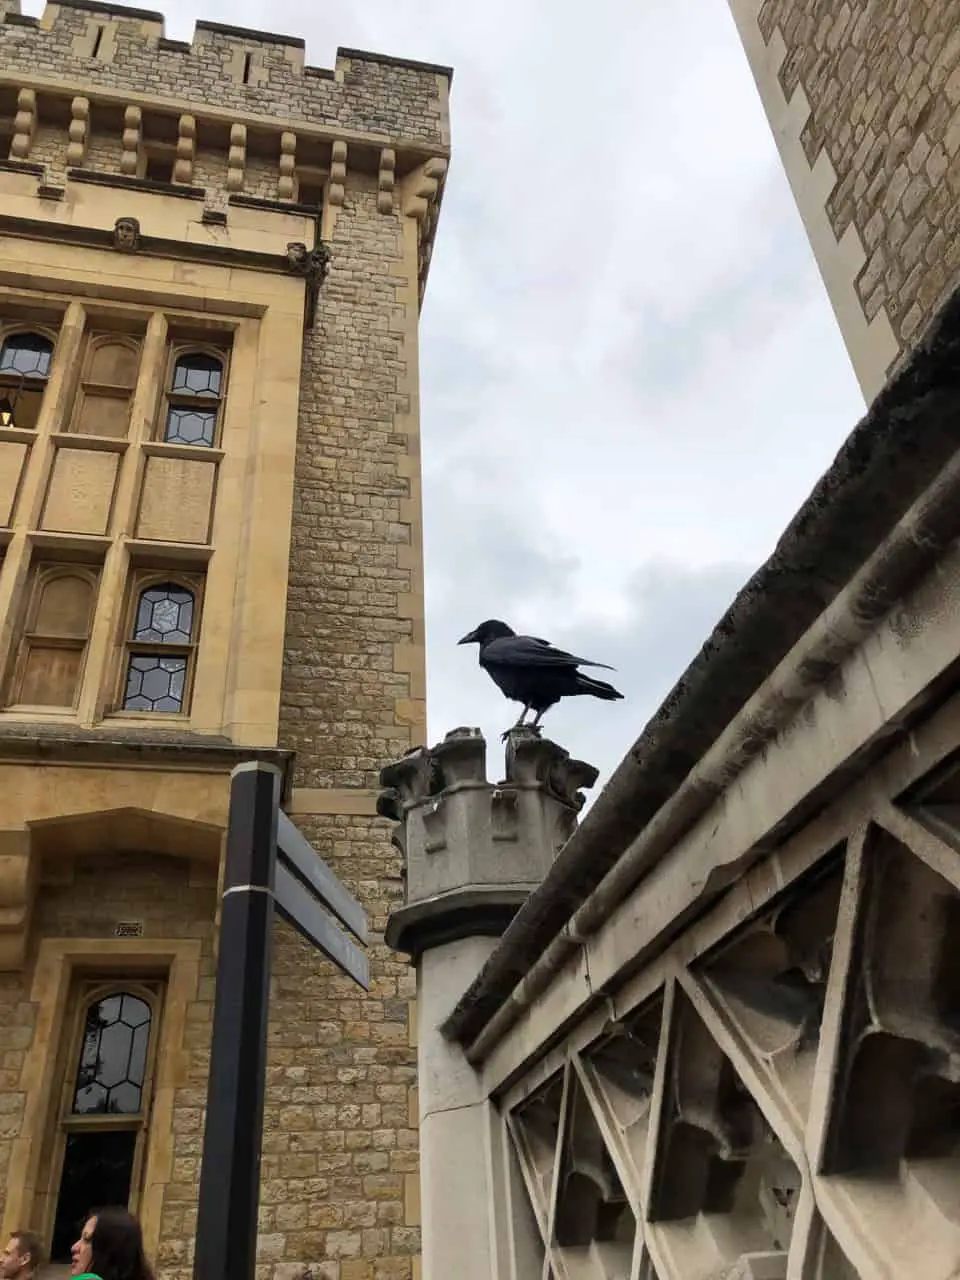 Raven at The Tour of London